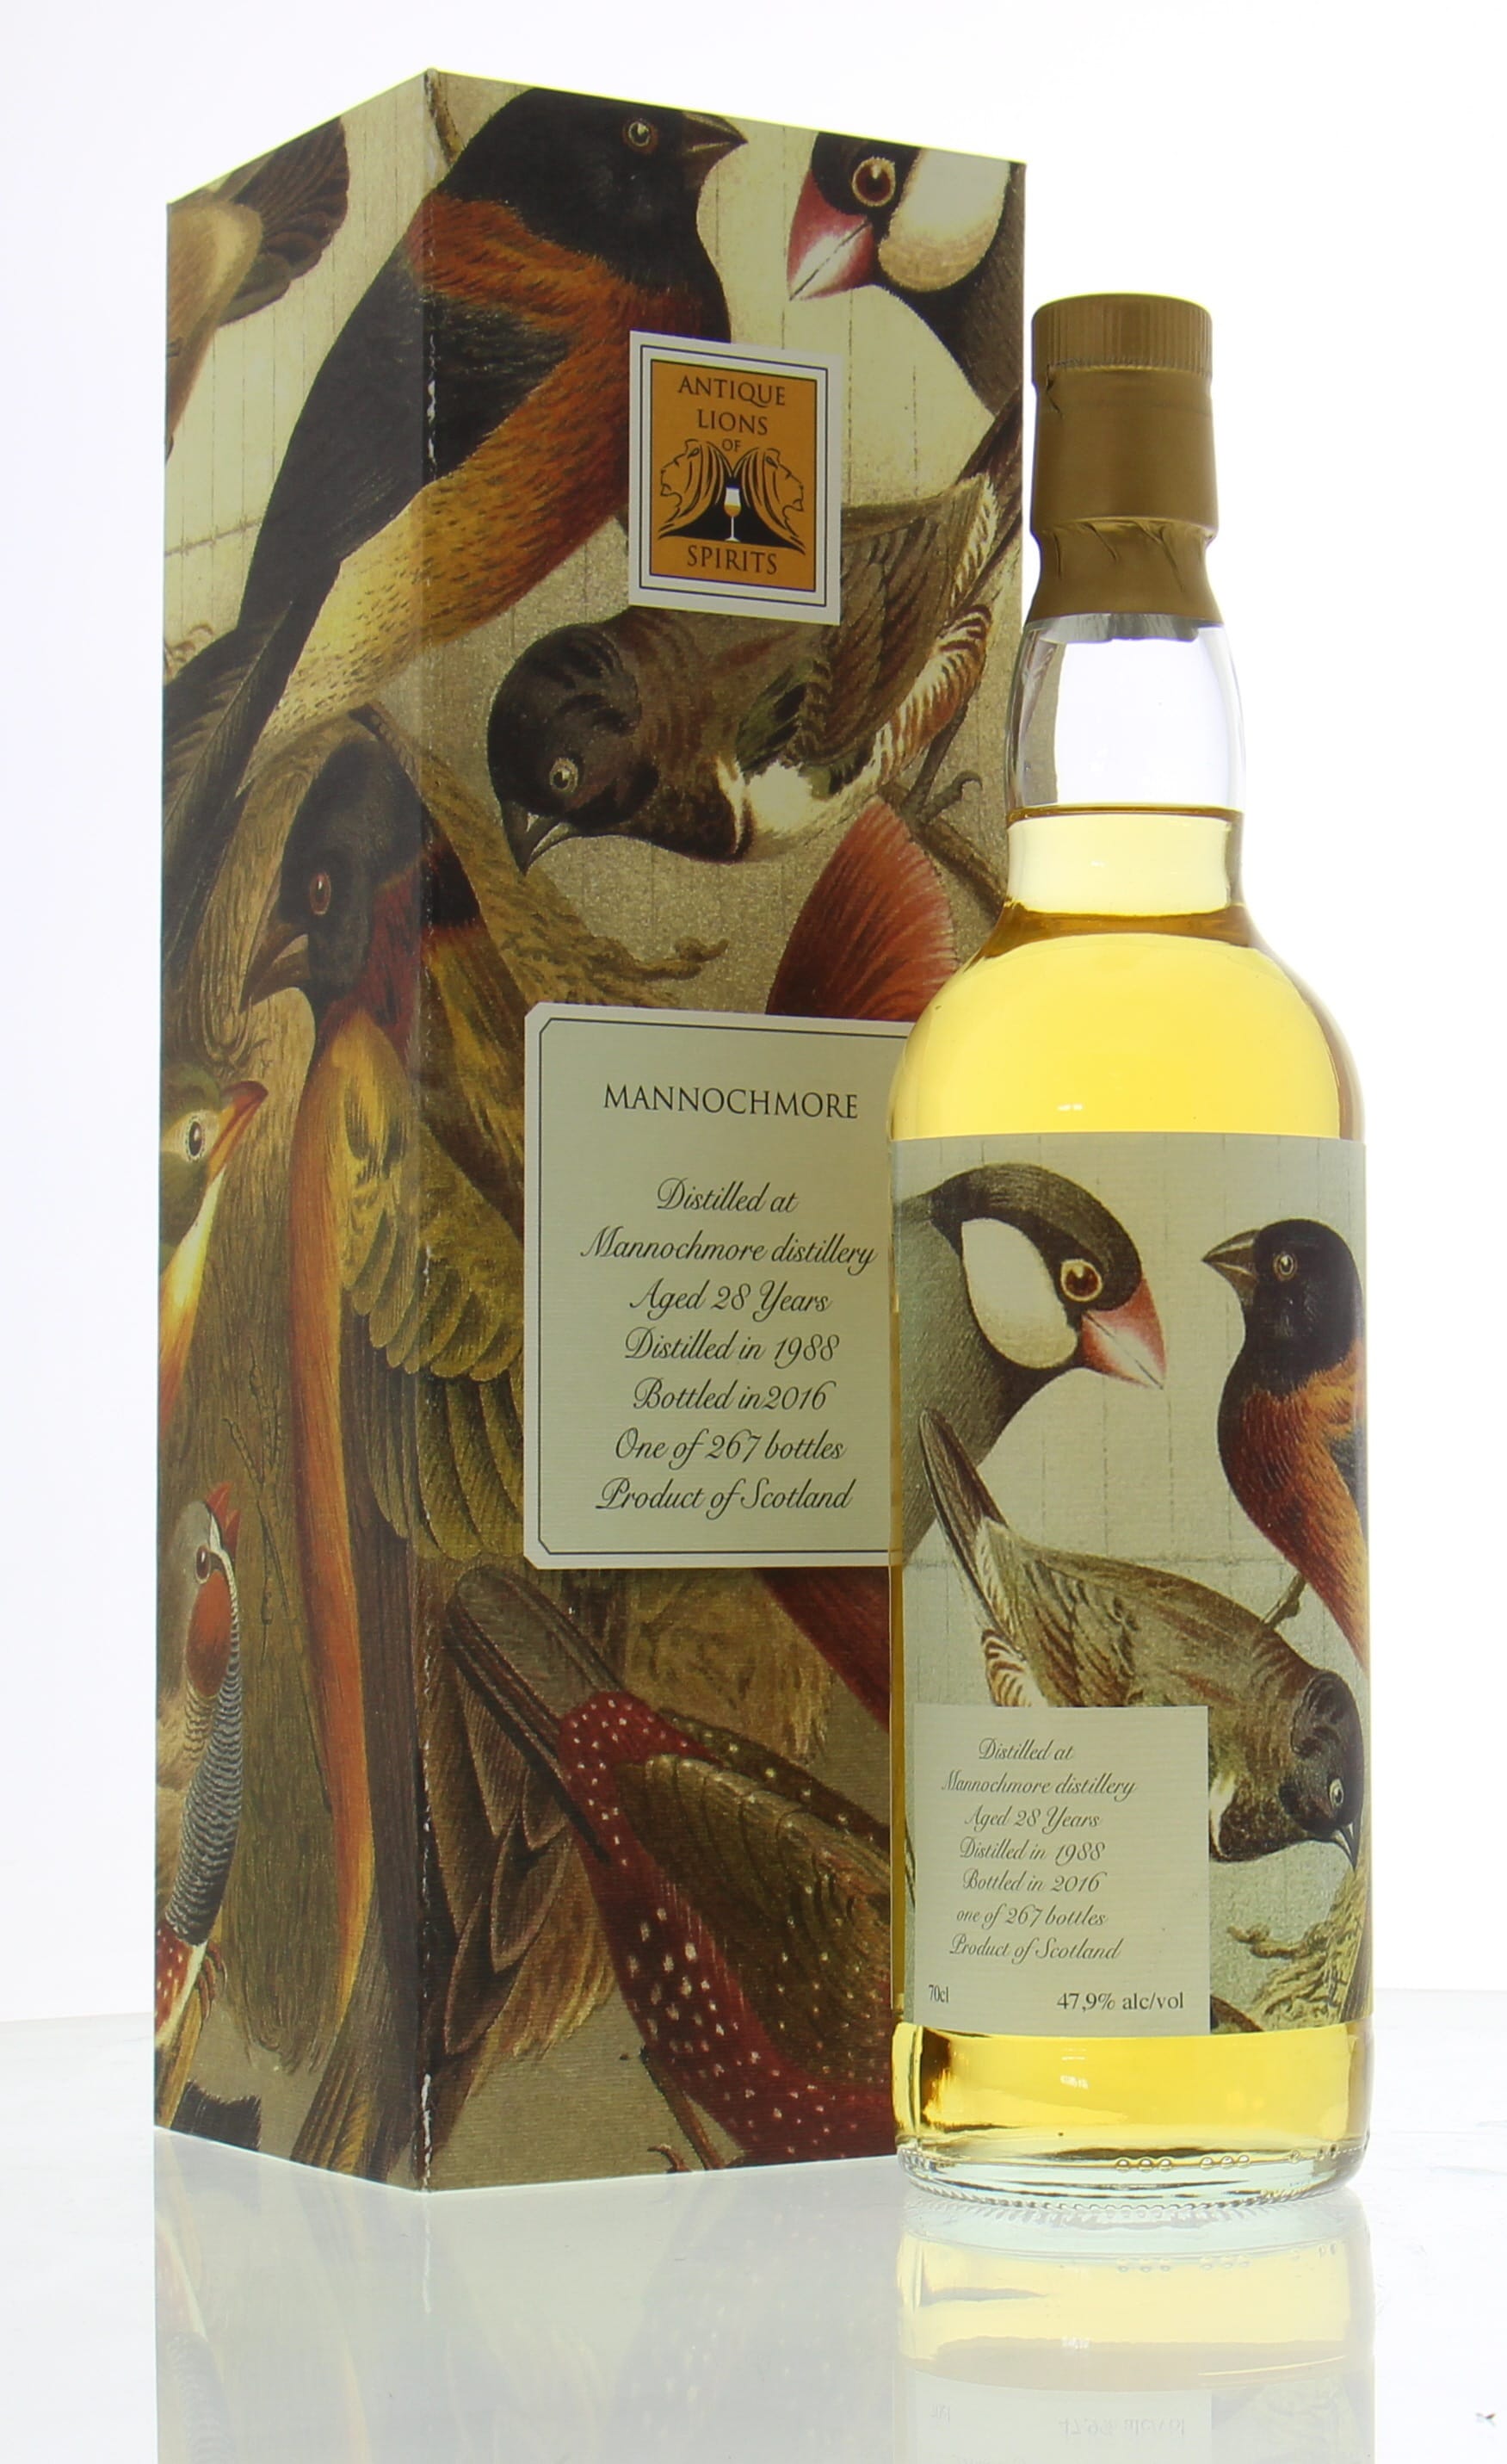 Mannochmore - 28 years Old Antique Lions of Spirits The Birds 47.9% 1988 In Original Container